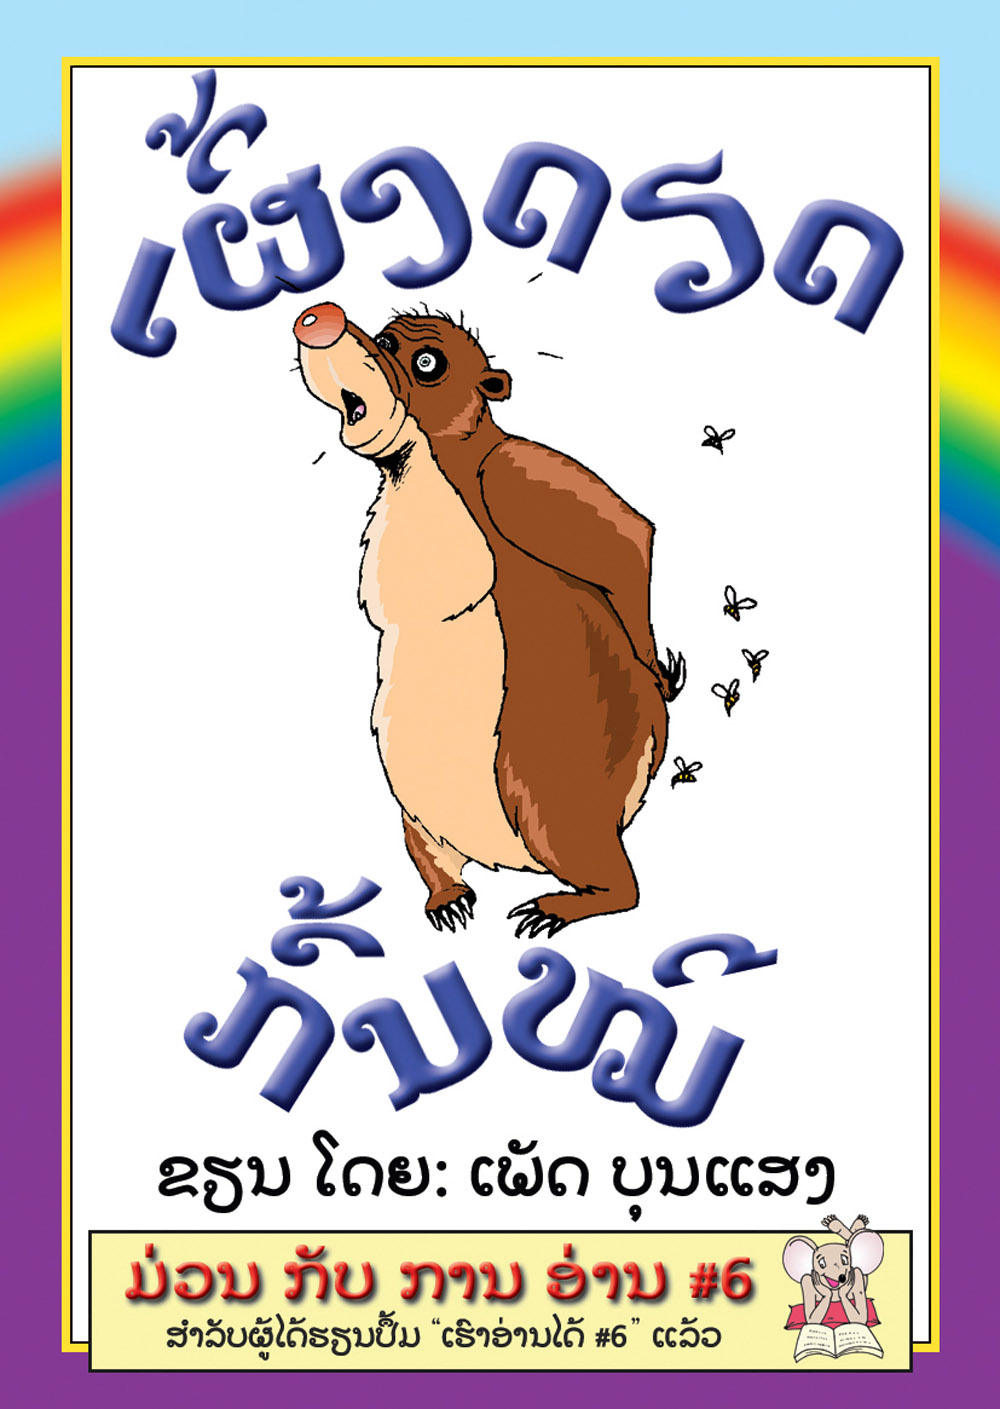 The Bees Sting the Bear large book cover, published in Lao language